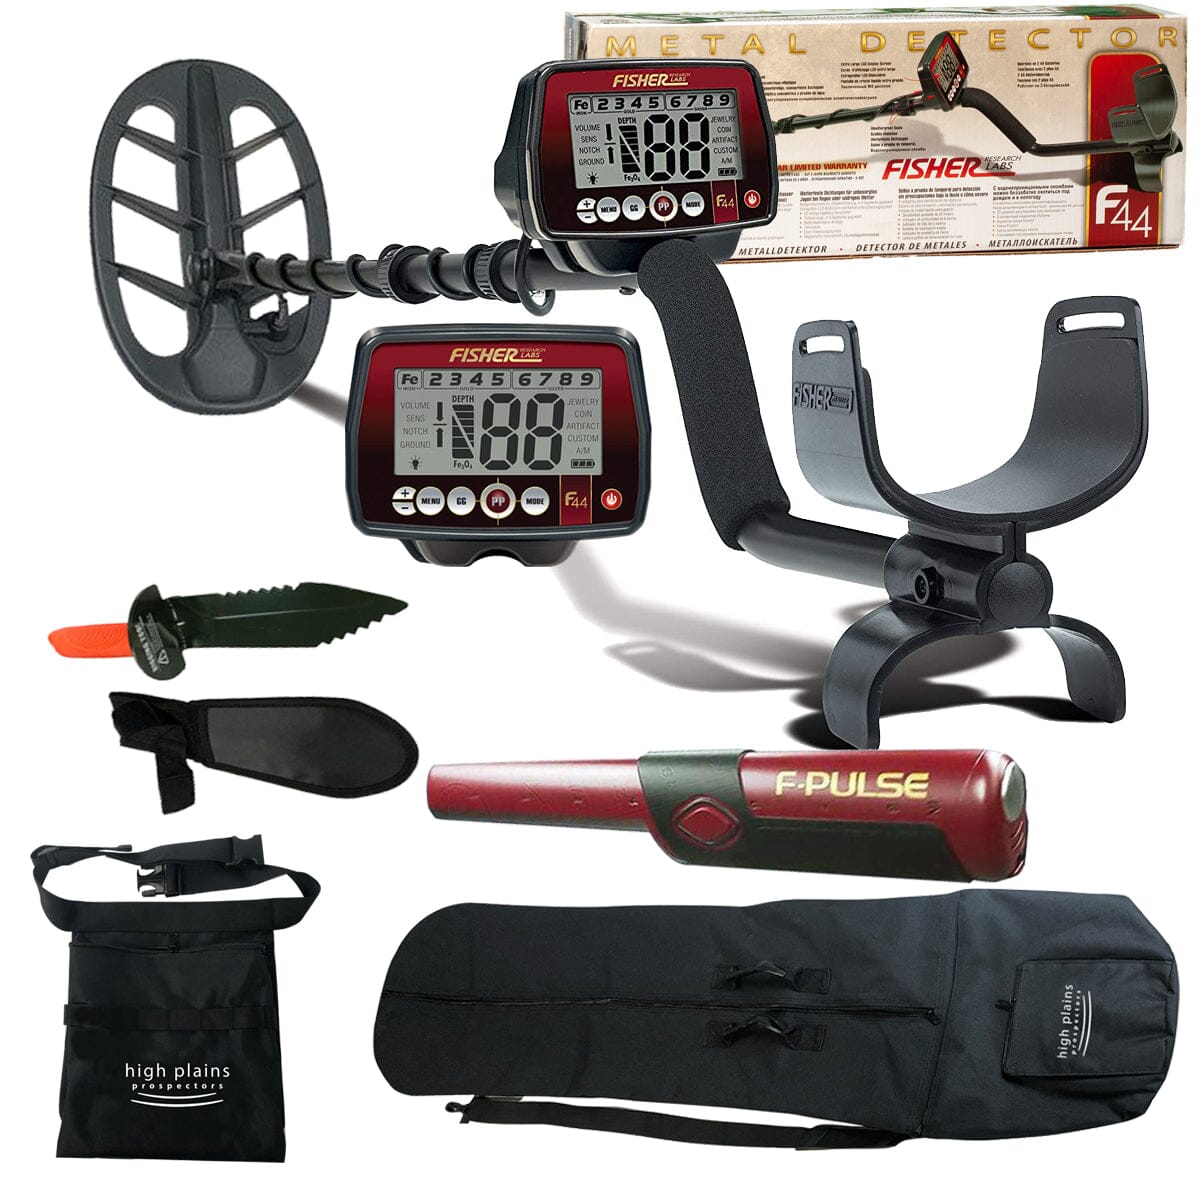 Fisher F44 GWP Metal Detector with 11" DD Coil, F-PULSE Pointer, Treasure-Seeker Bundle